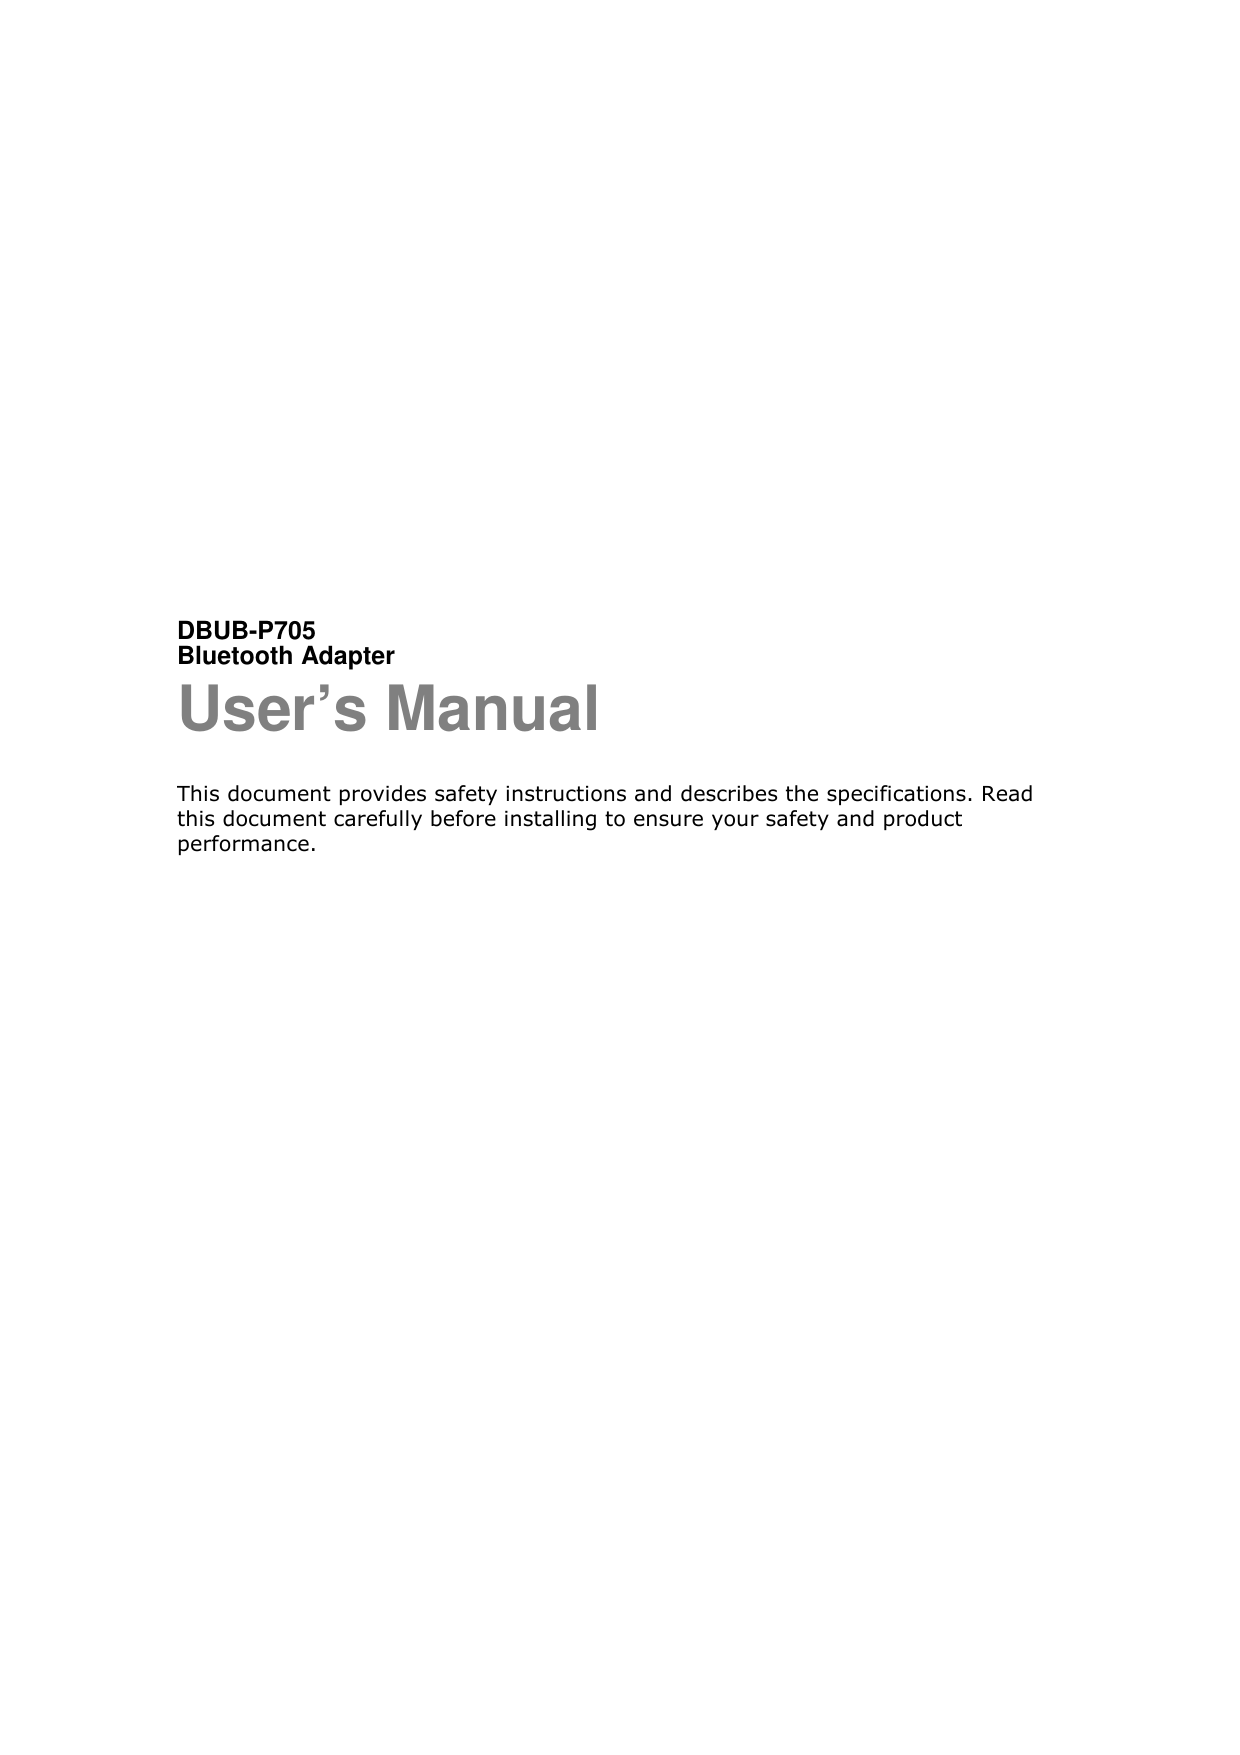            DBUB-P705   Bluetooth Adapter User’s Manual This document provides safety instructions and describes the specifications. Read this document carefully before installing to ensure your safety and product performance.    